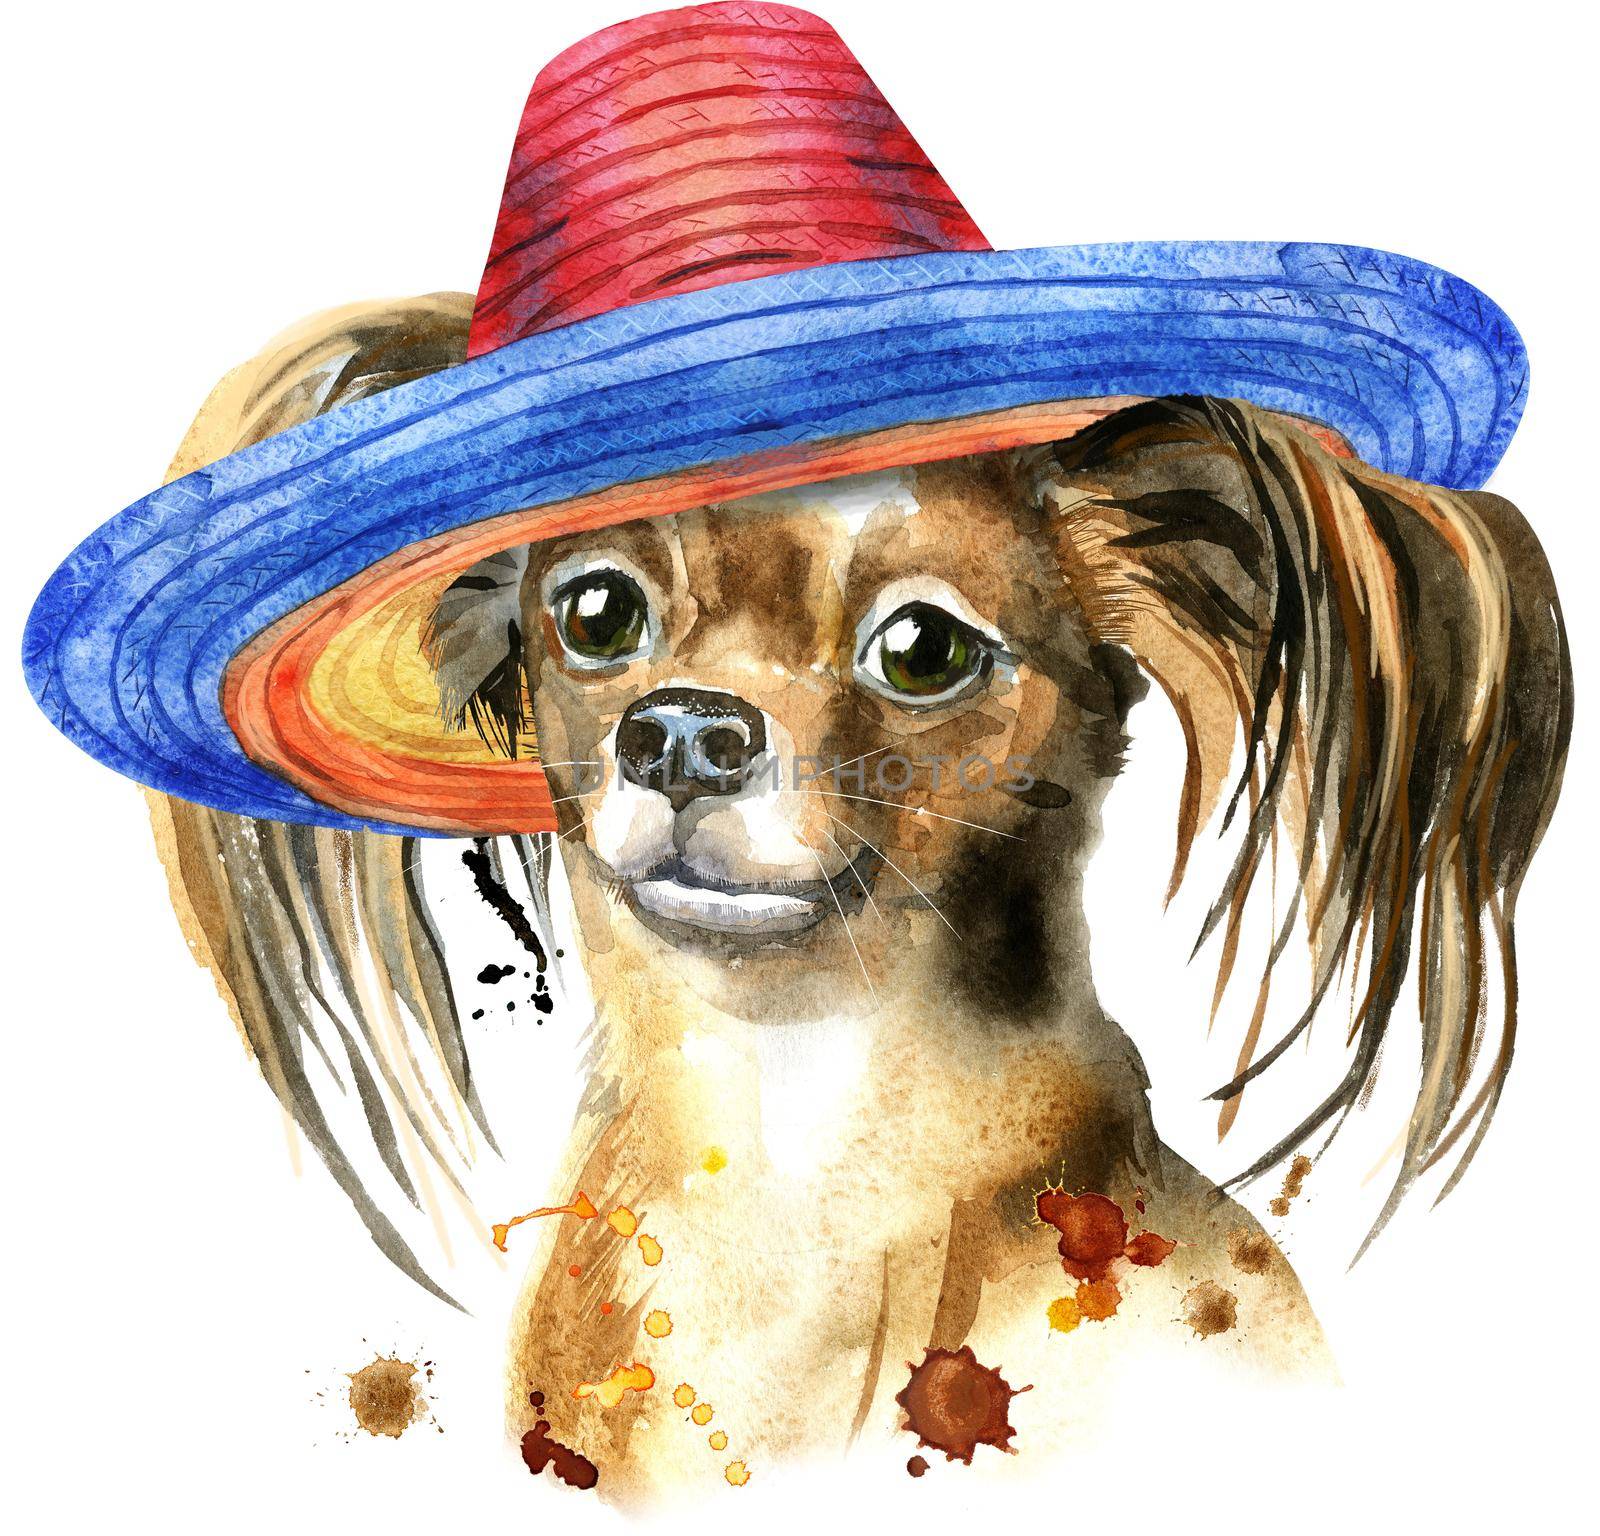 Cute Dog in sombrero. Dog t-shirt graphics. watercolor toyl terrier illustration